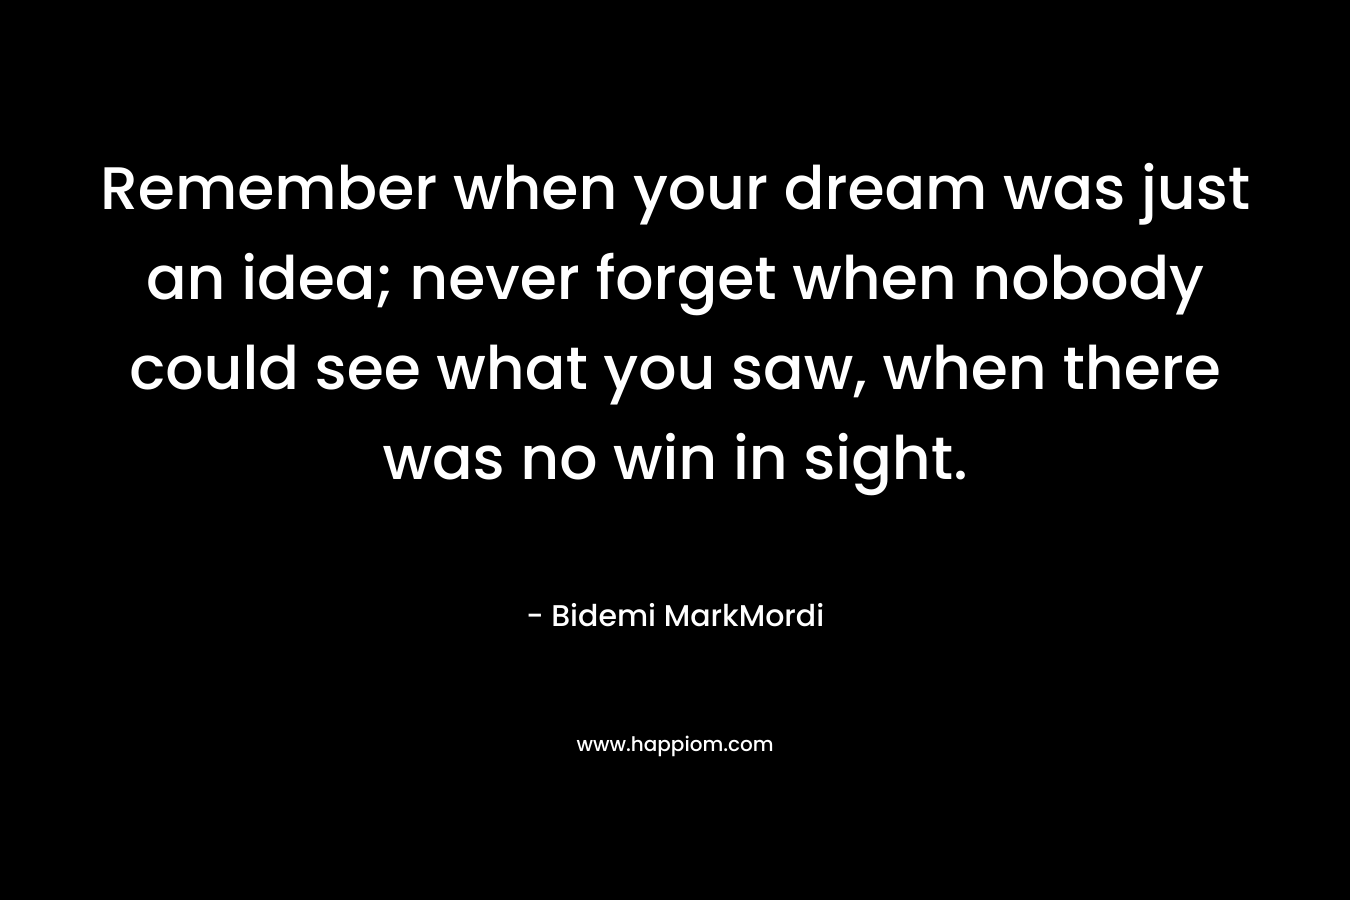 Remember when your dream was just an idea; never forget when nobody could see what you saw, when there was no win in sight.